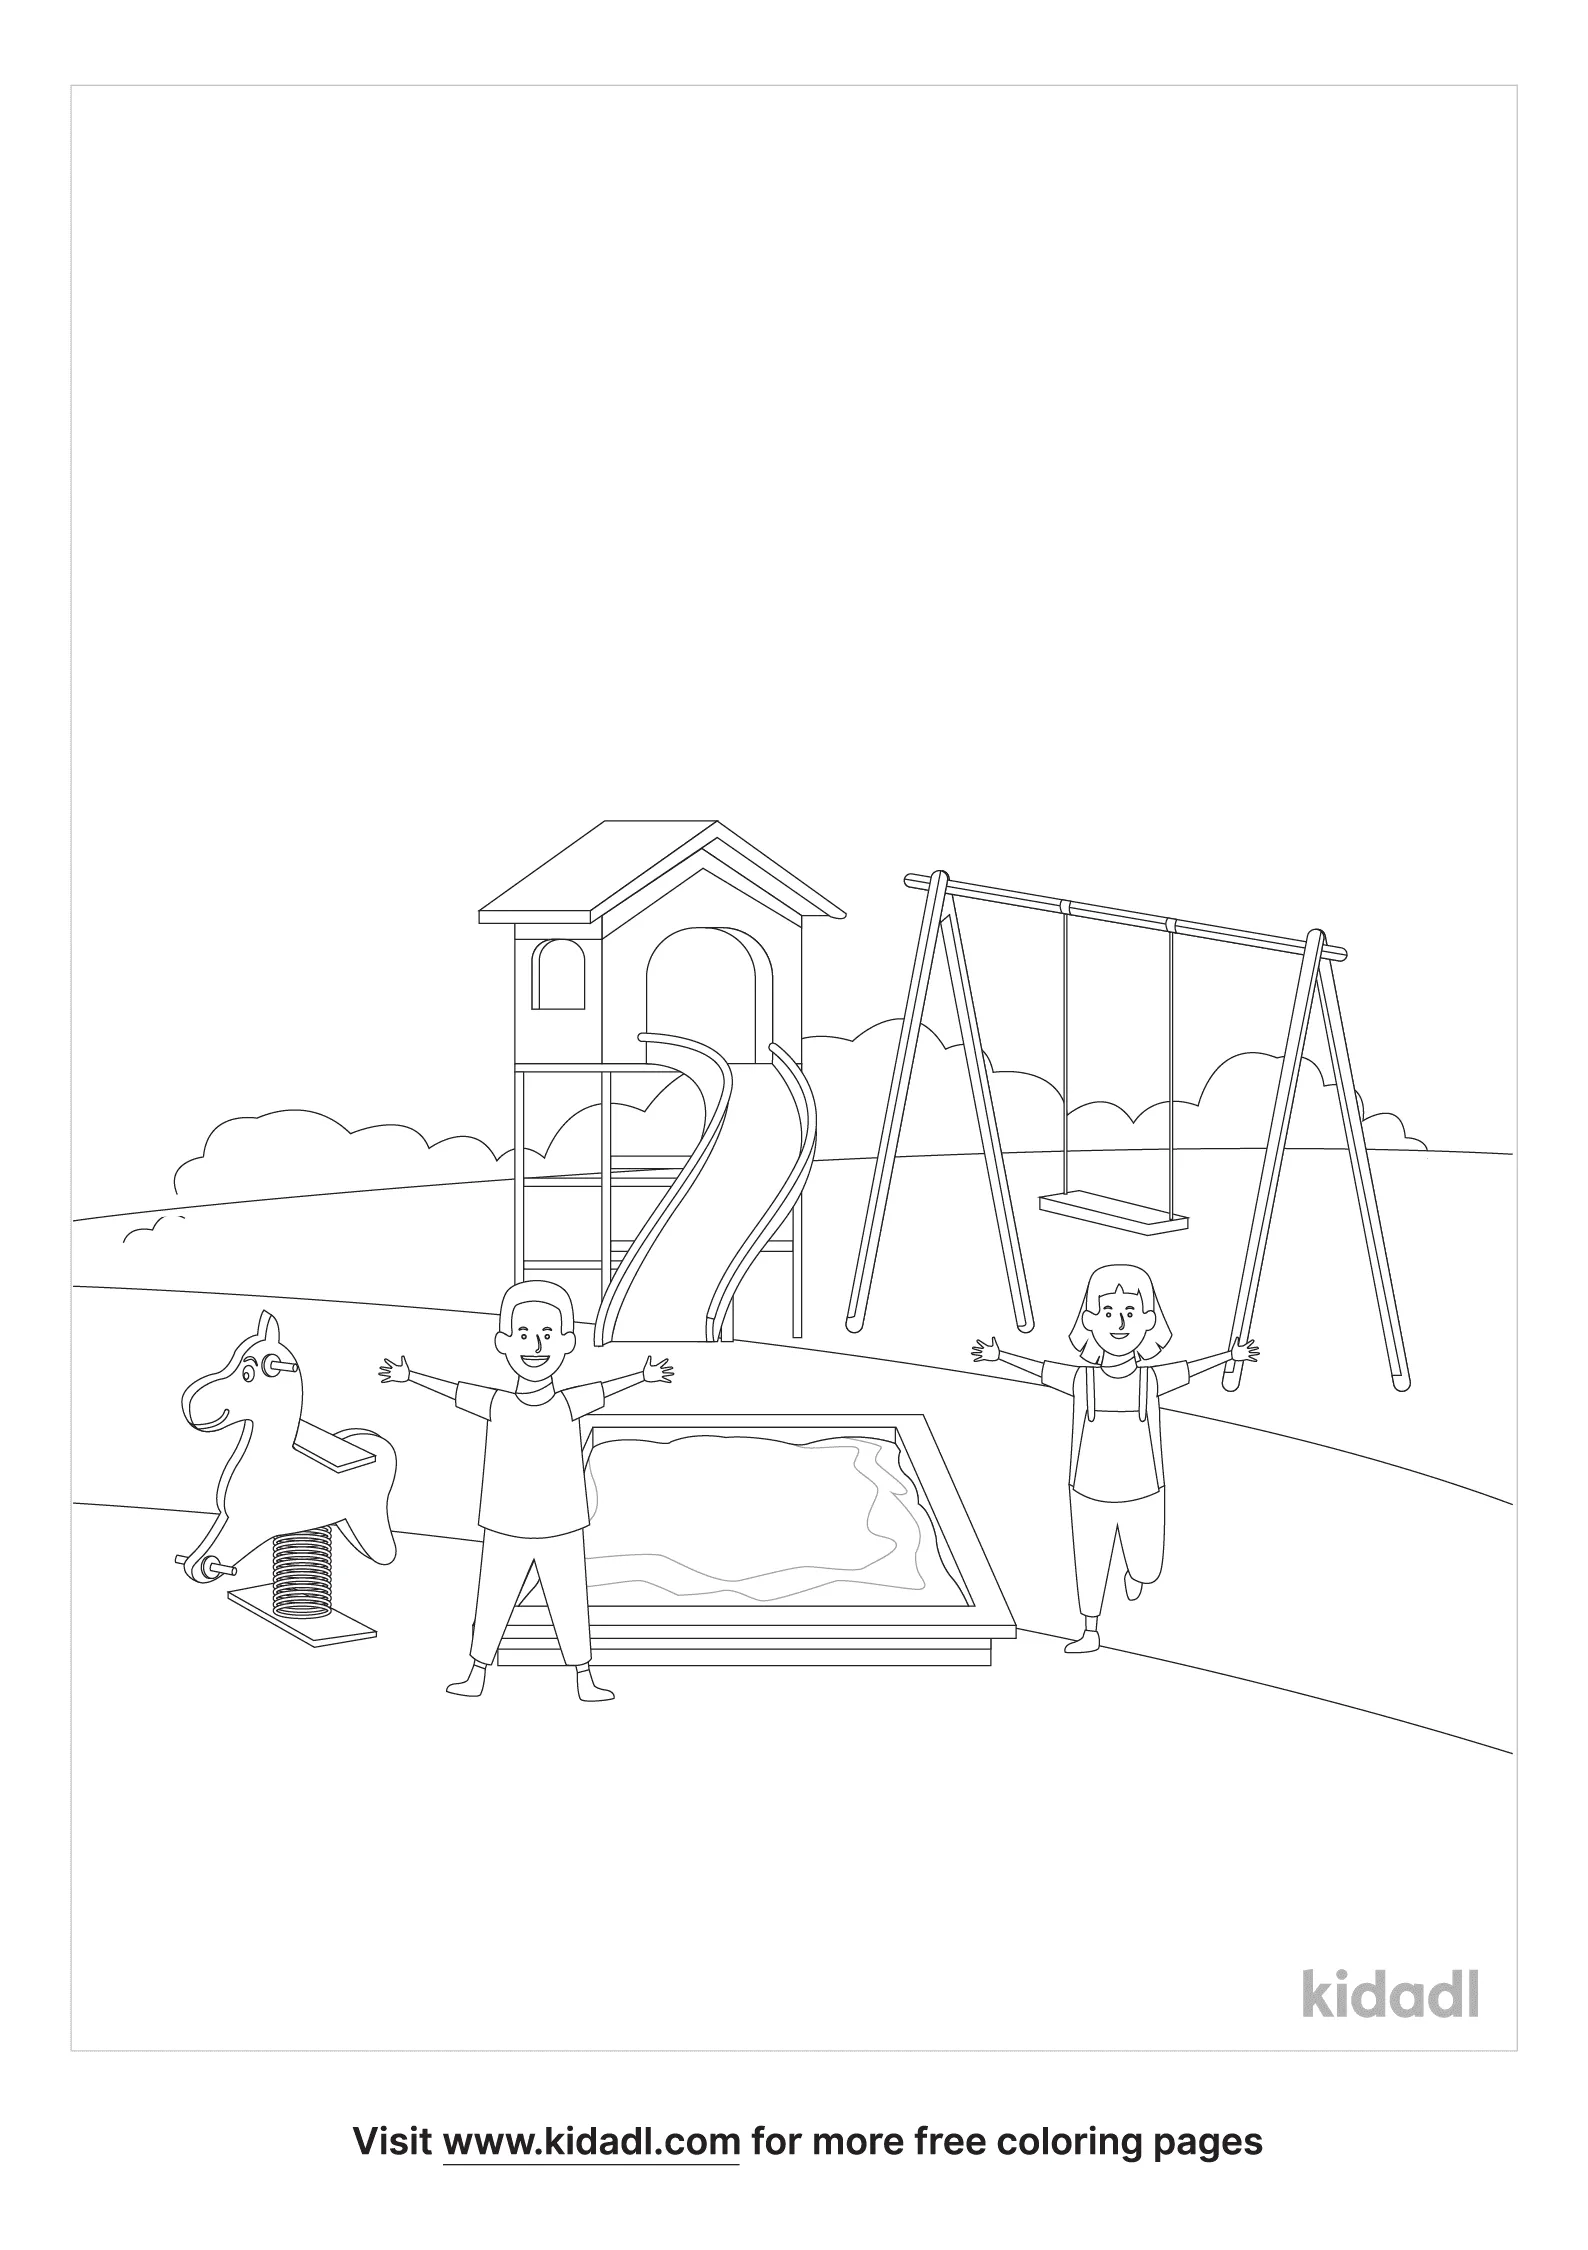 49+ fresh images Coloring Pages Swing Set : Playground Coloring Page